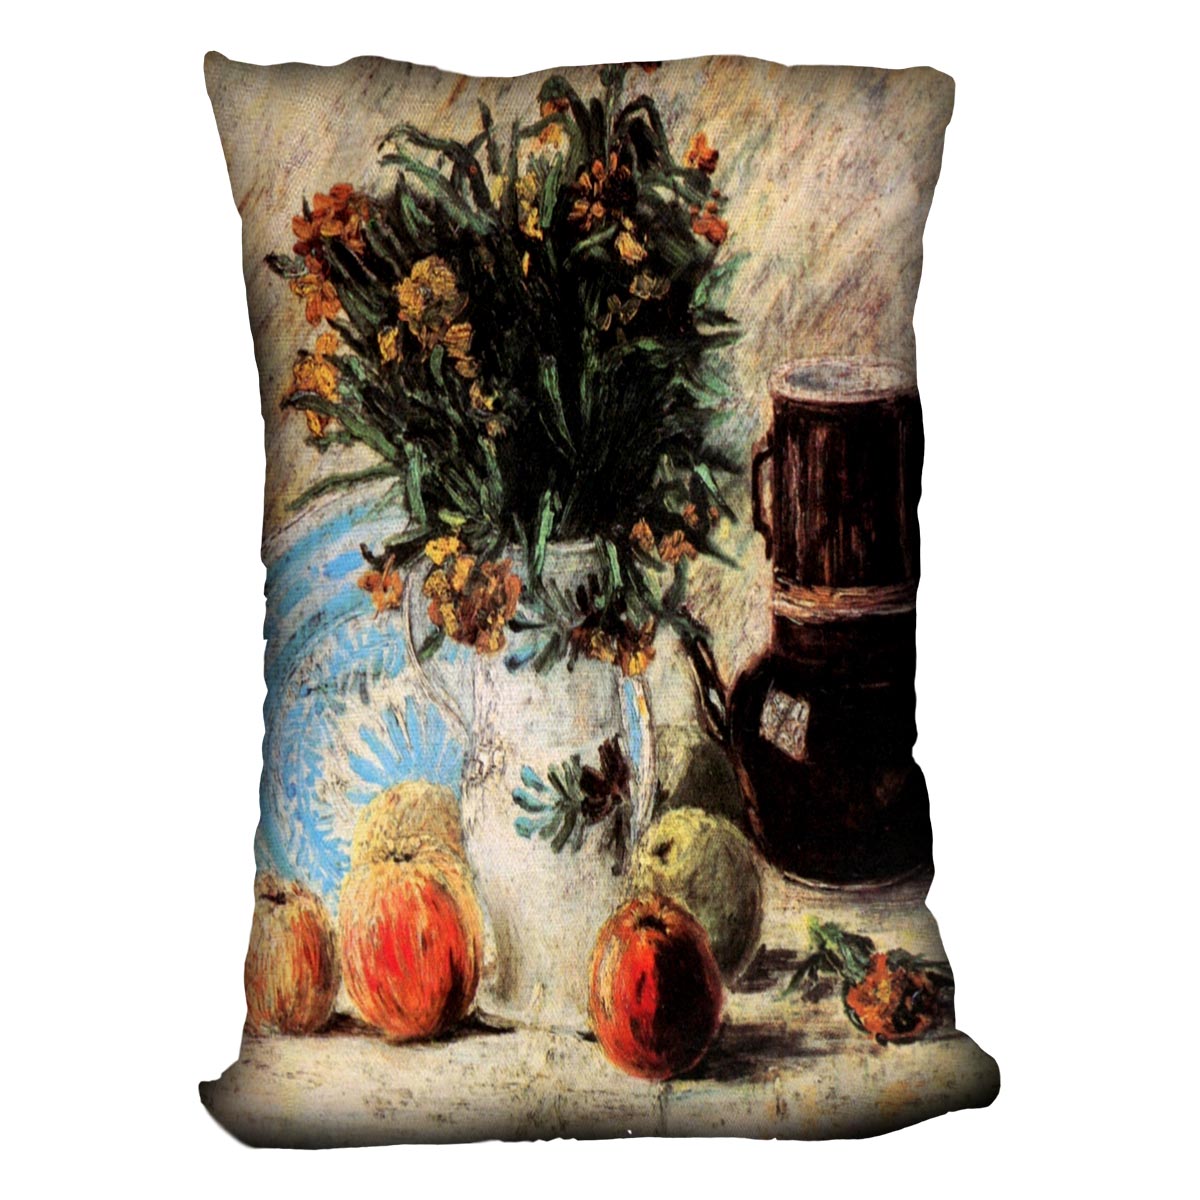 Vase with Flowers Coffeepot and Fruit by Van Gogh Cushion